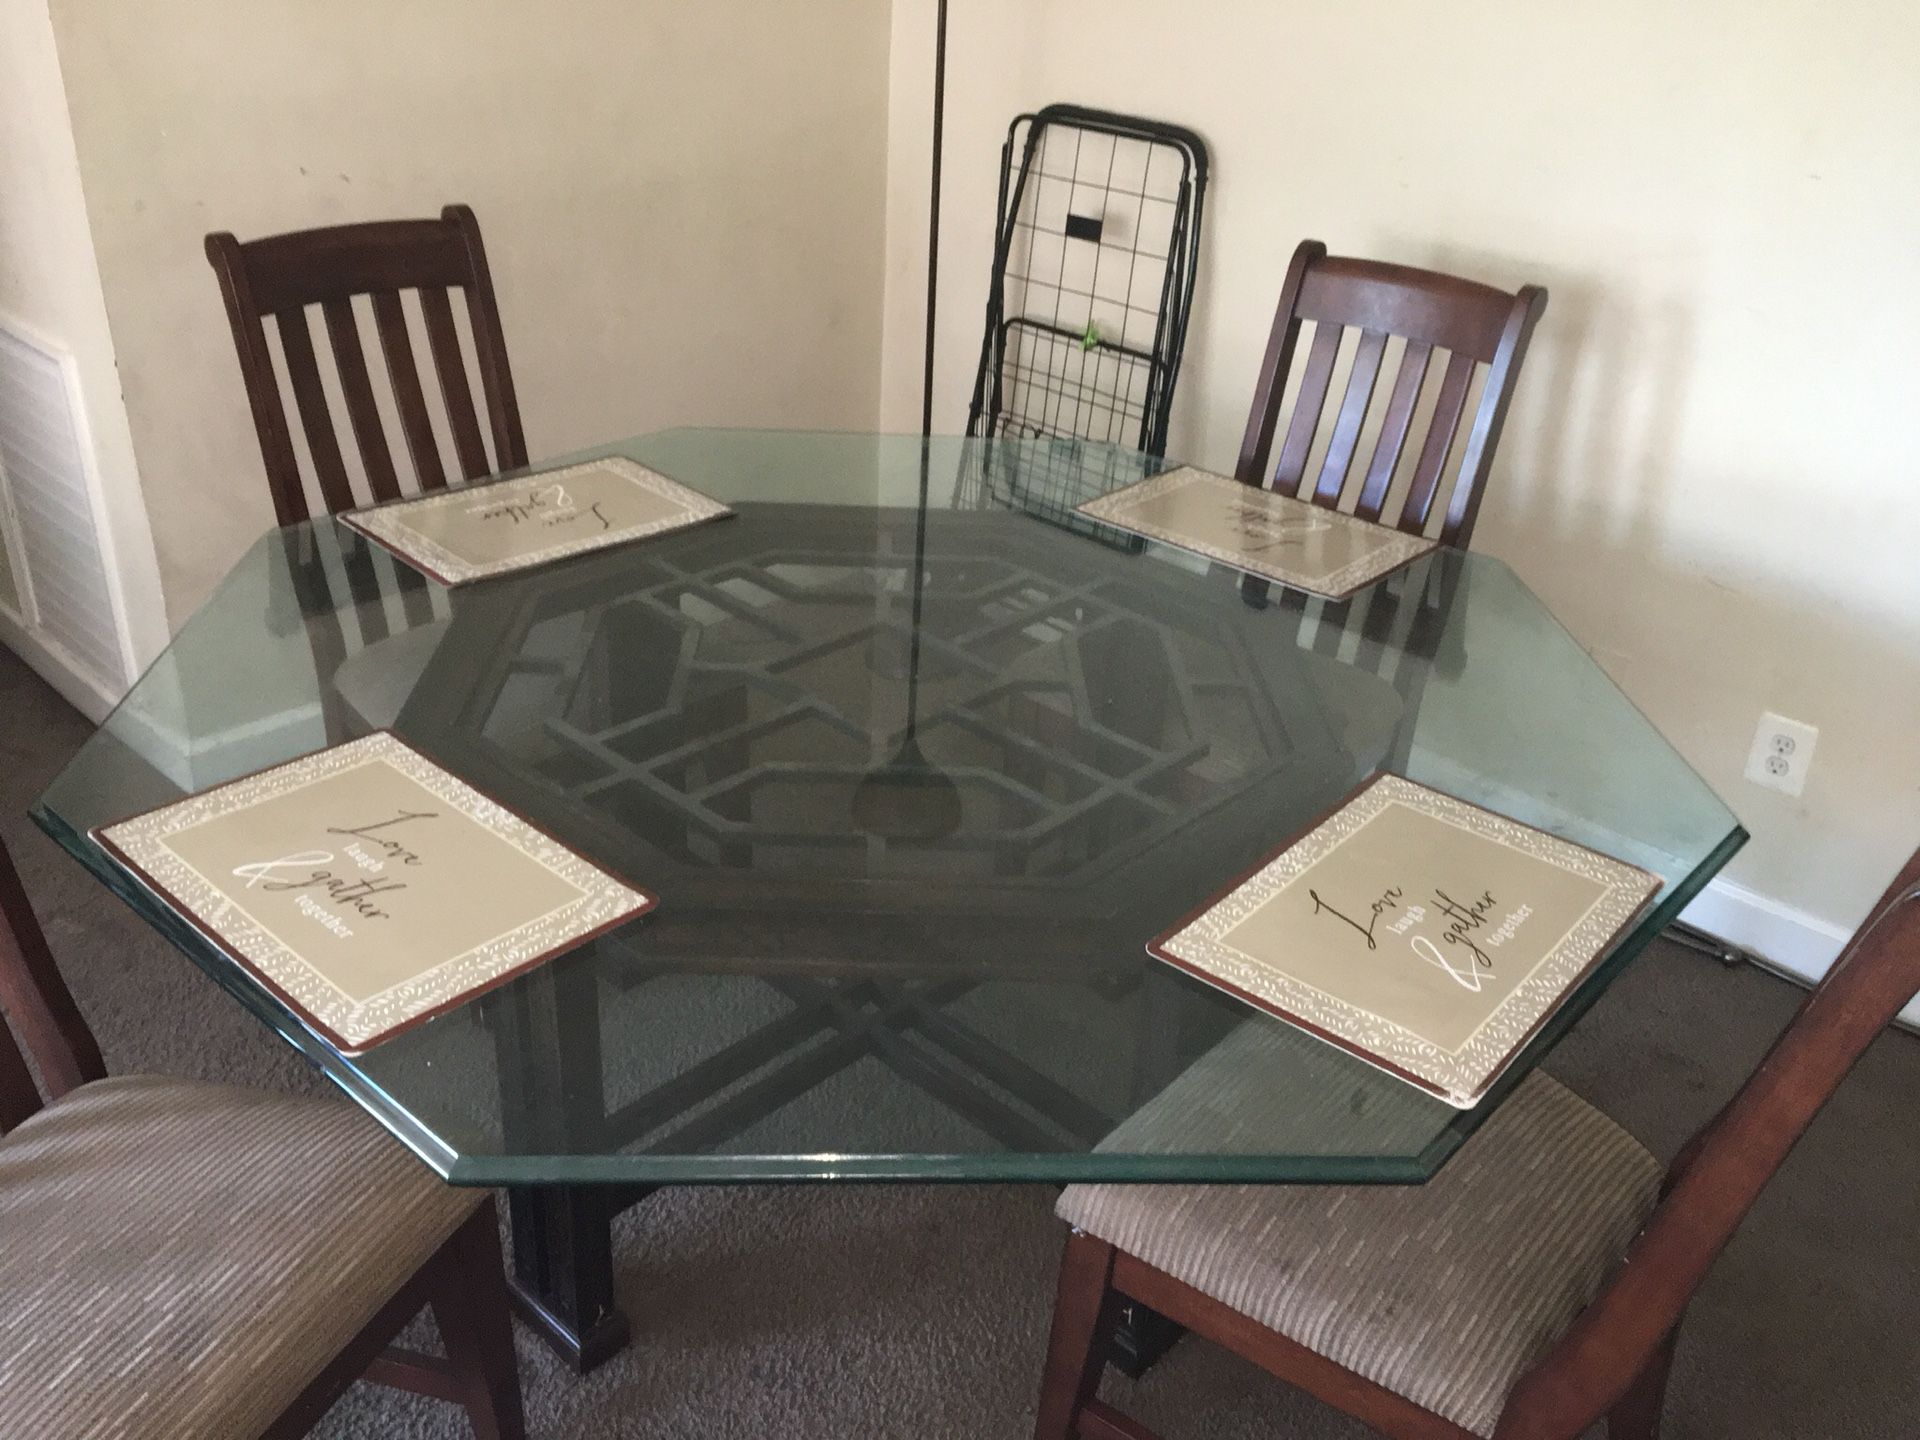 Vtg Drexel Glass Octagon Dining Table Chinoiserie Mid Century Modern style .....Large glass table with 4 wood chairs